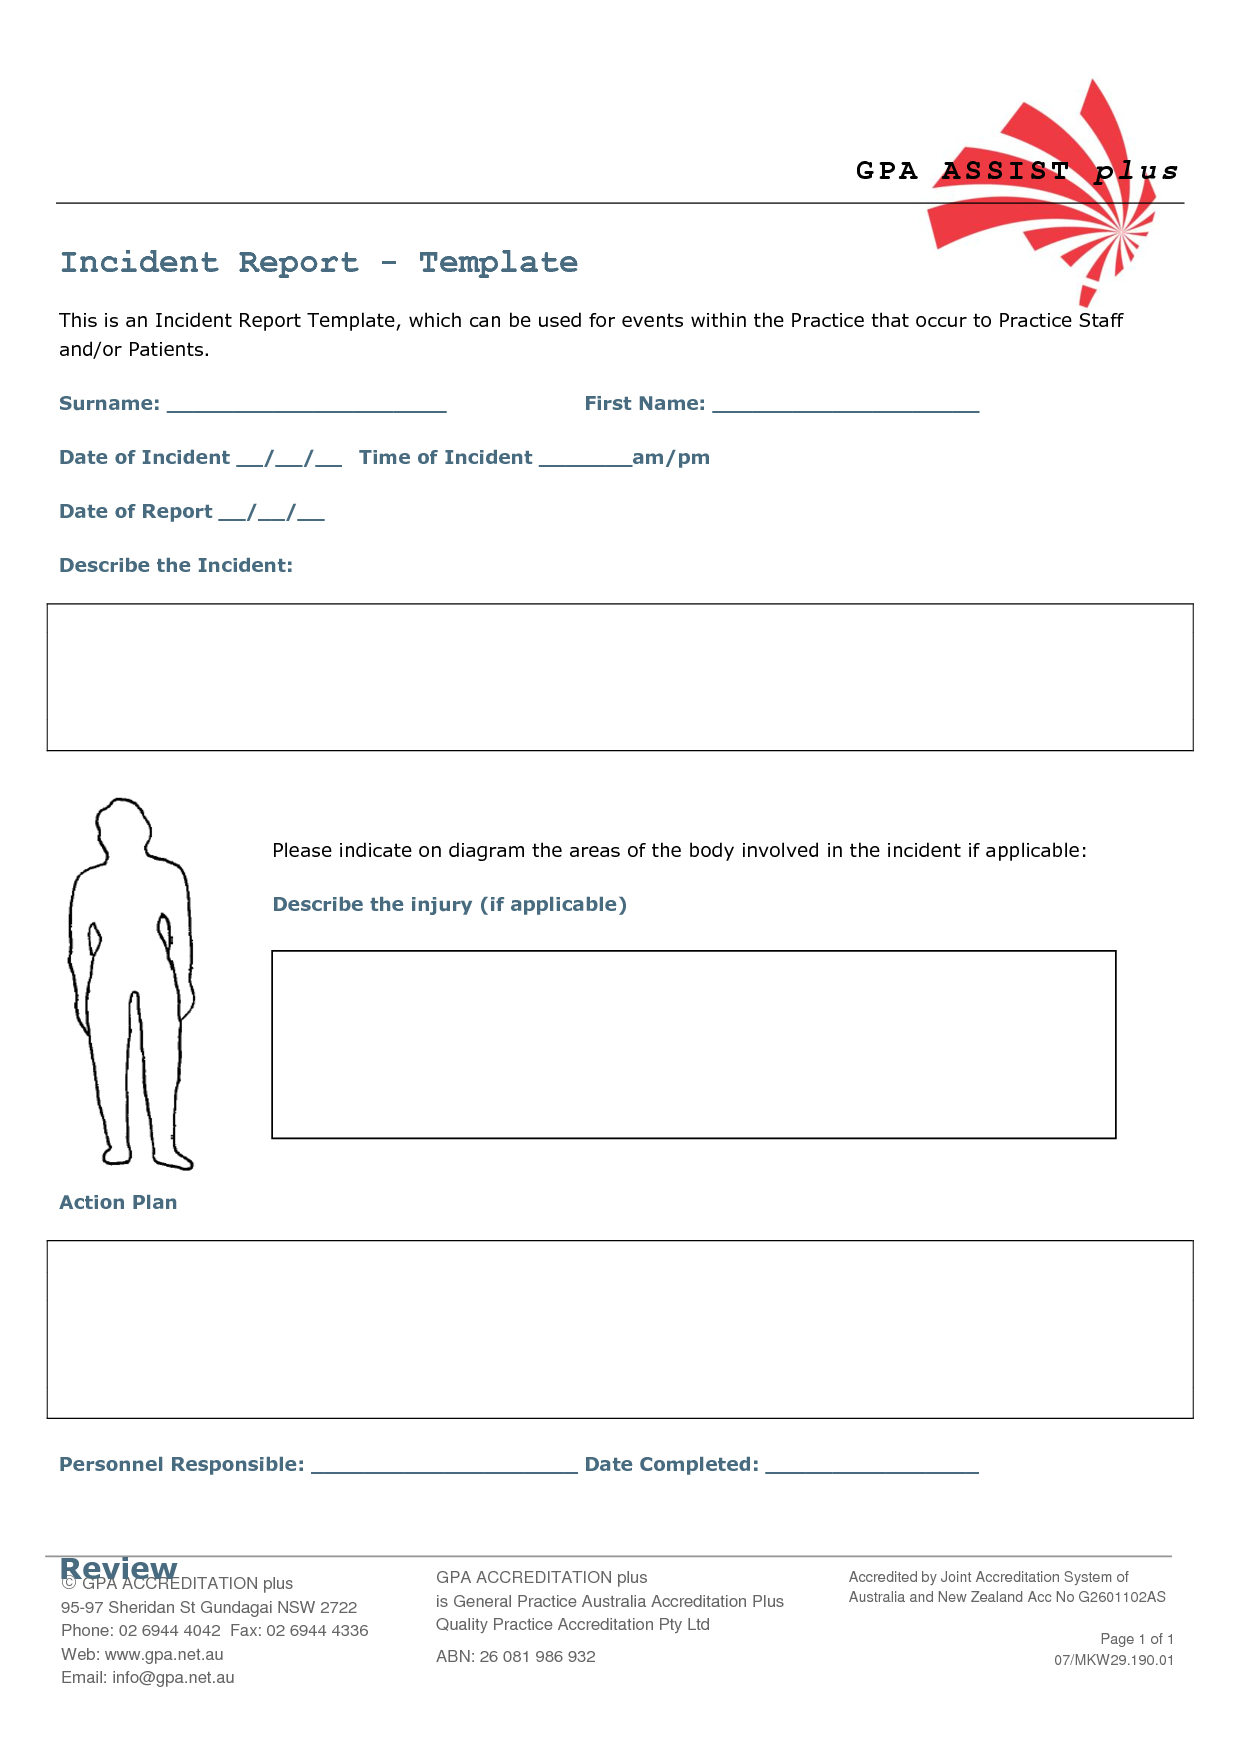 Incident Report Template Click Here For A Free Video Throughout Incident Report Template Microsoft